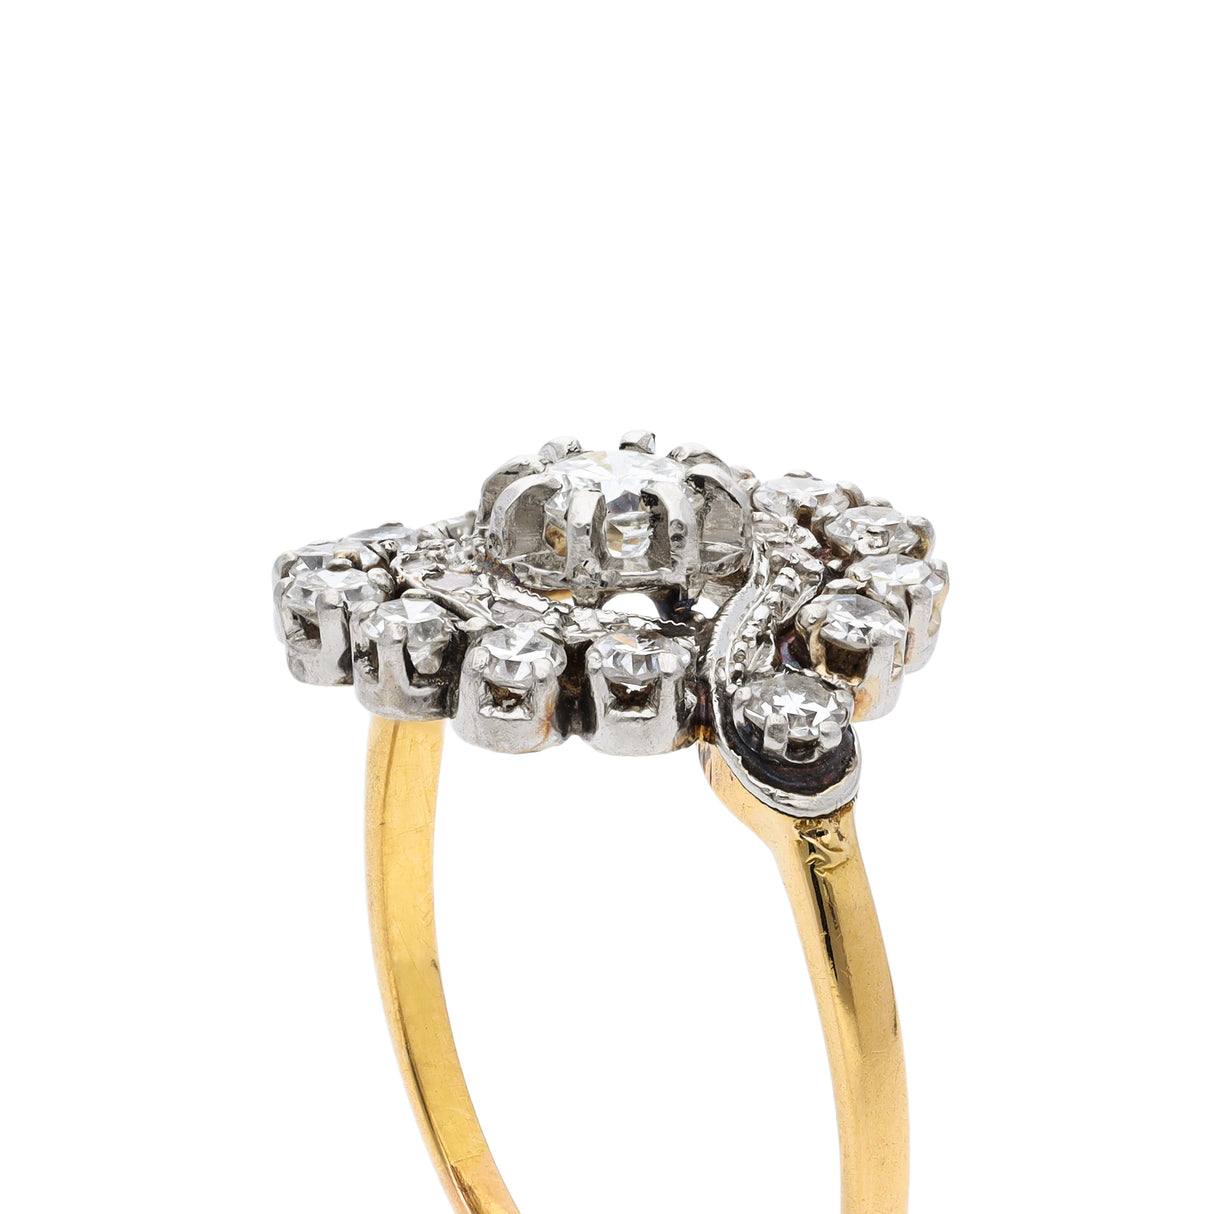 Antique French diamond cluster engagement ring, side view.